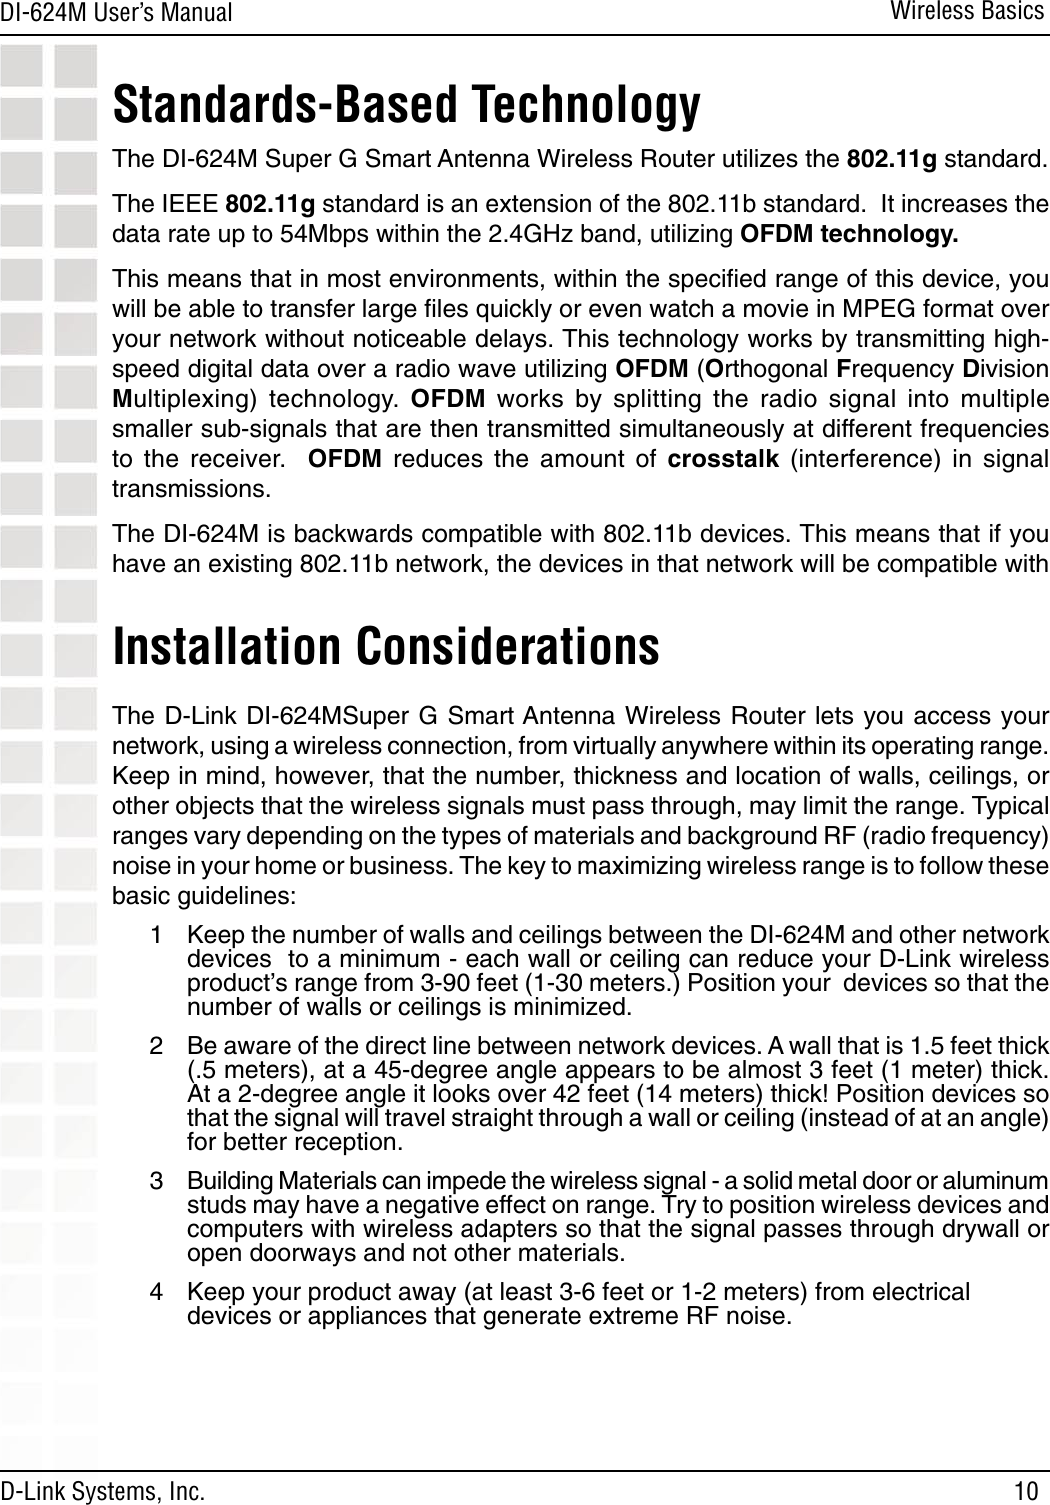 10DI-624M User’s Manual D-Link Systems, Inc.Wireless BasicsInstallation Considerations The D-Link DI-624MSuper G Smart Antenna Wireless Router lets  you access your network, using a wireless connection, from virtually anywhere within its operating range. Keep in mind, however, that the number, thickness and location of walls, ceilings, or other objects that the wireless signals must pass through, may limit the range. Typical ranges vary depending on the types of materials and background RF (radio frequency) noise in your home or business. The key to maximizing wireless range is to follow these basic guidelines:1  Keep the number of walls and ceilings between the DI-624M and other network devices  to a minimum - each wall or ceiling can reduce your D-Link wireless product’s range from 3-90 feet (1-30 meters.) Position your  devices so that the number of walls or ceilings is minimized.2  Be aware of the direct line between network devices. A wall that is 1.5 feet thick (.5 meters), at a 45-degree angle appears to be almost 3 feet (1 meter) thick. At a 2-degree angle it looks over 42 feet (14 meters) thick! Position devices so that the signal will travel straight through a wall or ceiling (instead of at an angle) for better reception.3  Building Materials can impede the wireless signal - a solid metal door or aluminum studs may have a negative effect on range. Try to position wireless devices and computers with wireless adapters so that the signal passes through drywall or open doorways and not other materials.4  Keep your product away (at least 3-6 feet or 1-2 meters) from electrical   devices or appliances that generate extreme RF noise.Standards-Based TechnologyThe DI-624M Super G Smart Antenna Wireless Router utilizes the 802.11g standard.The IEEE 802.11g standard is an extension of the 802.11b standard.  It increases the data rate up to 54Mbps within the 2.4GHz band, utilizing OFDM technology.This means that in most environments, within the speciﬁed range of this device, you will be able to transfer large ﬁles quickly or even watch a movie in MPEG format over your network without noticeable delays. This technology works by transmitting high-speed digital data over a radio wave utilizing OFDM (Orthogonal Frequency Division Multiplexing)  technology.  OFDM  works  by  splitting  the  radio  signal  into  multiple smaller sub-signals that are then transmitted simultaneously at different frequencies to  the  receiver.    OFDM  reduces  the  amount  of  crosstalk  (interference)  in  signal transmissions. The DI-624M is backwards compatible with 802.11b devices. This means that if you have an existing 802.11b network, the devices in that network will be compatible with 